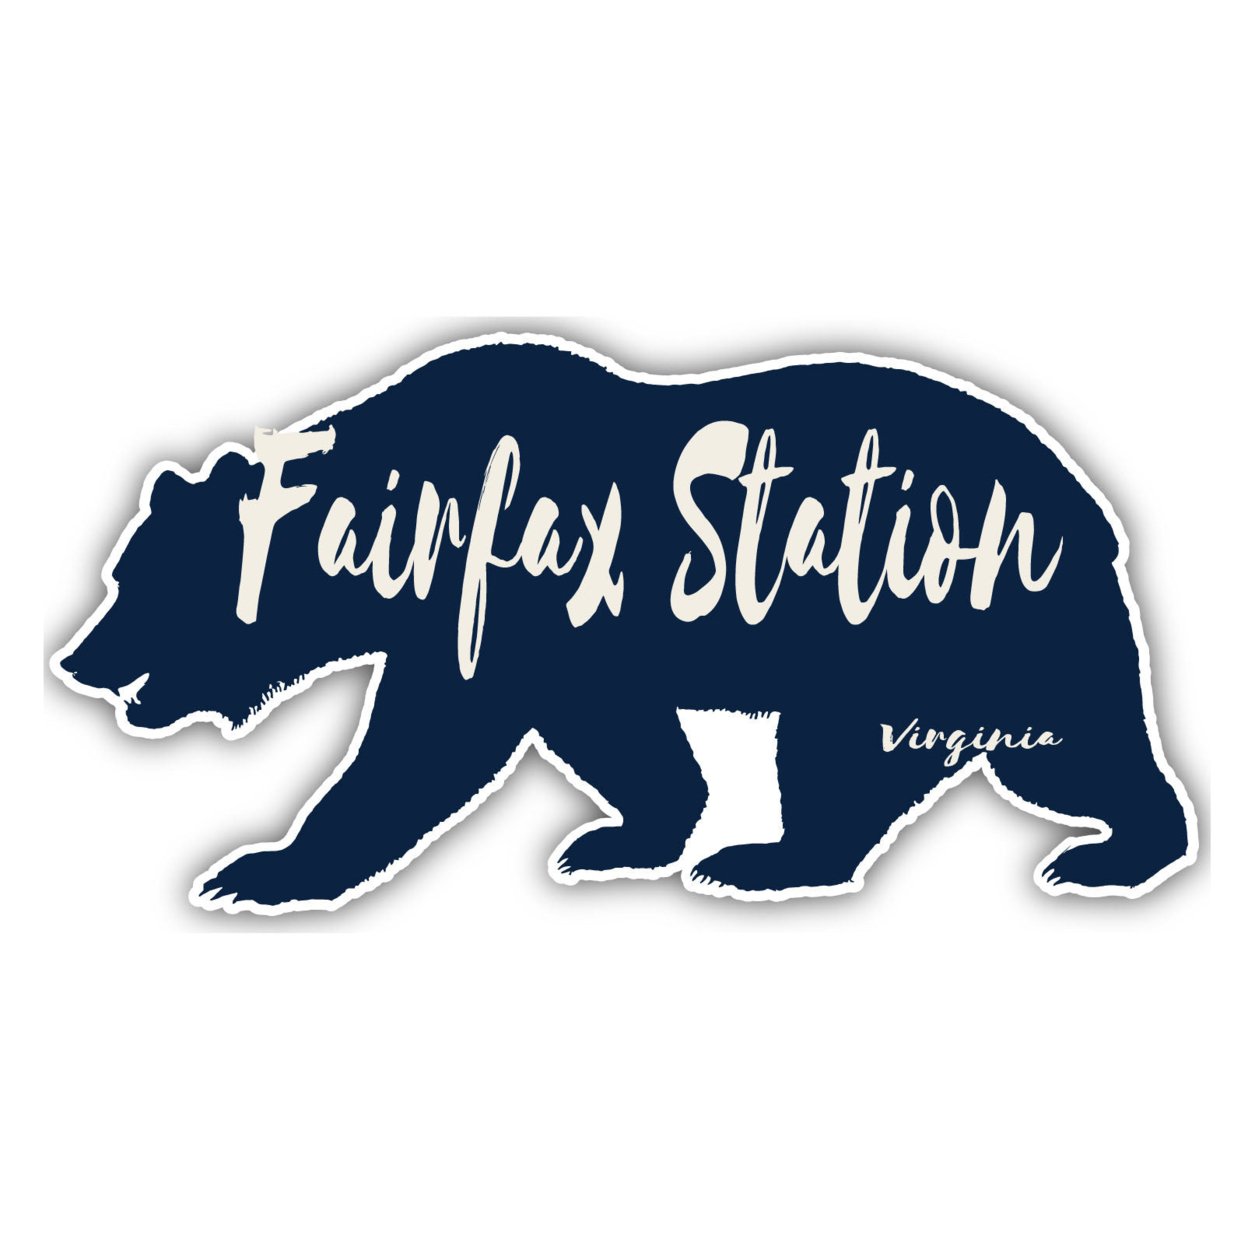 Fairfax Station Virginia Souvenir Decorative Stickers (Choose Theme And Size) - 4-Pack, 8-Inch, Bear